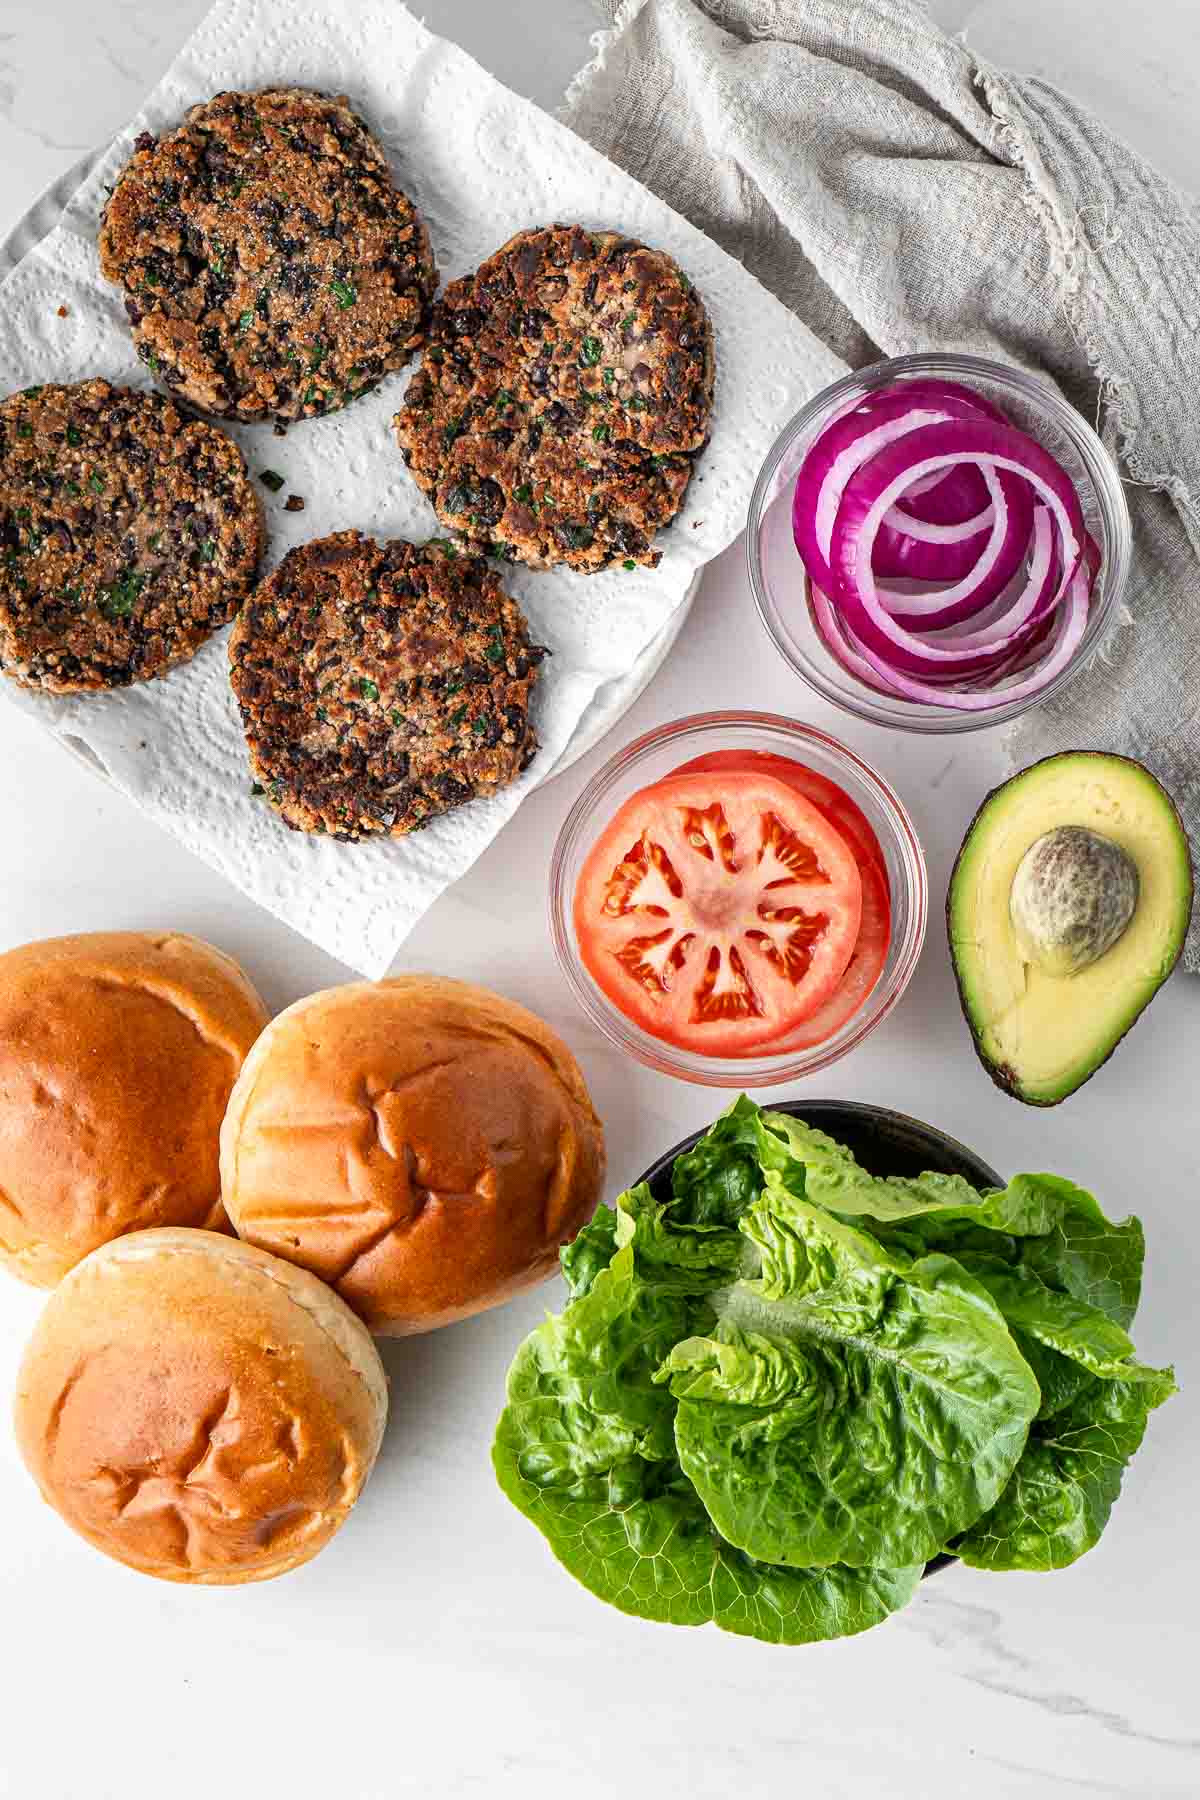 Cooked black bean burgers with all ingredients to assemble.